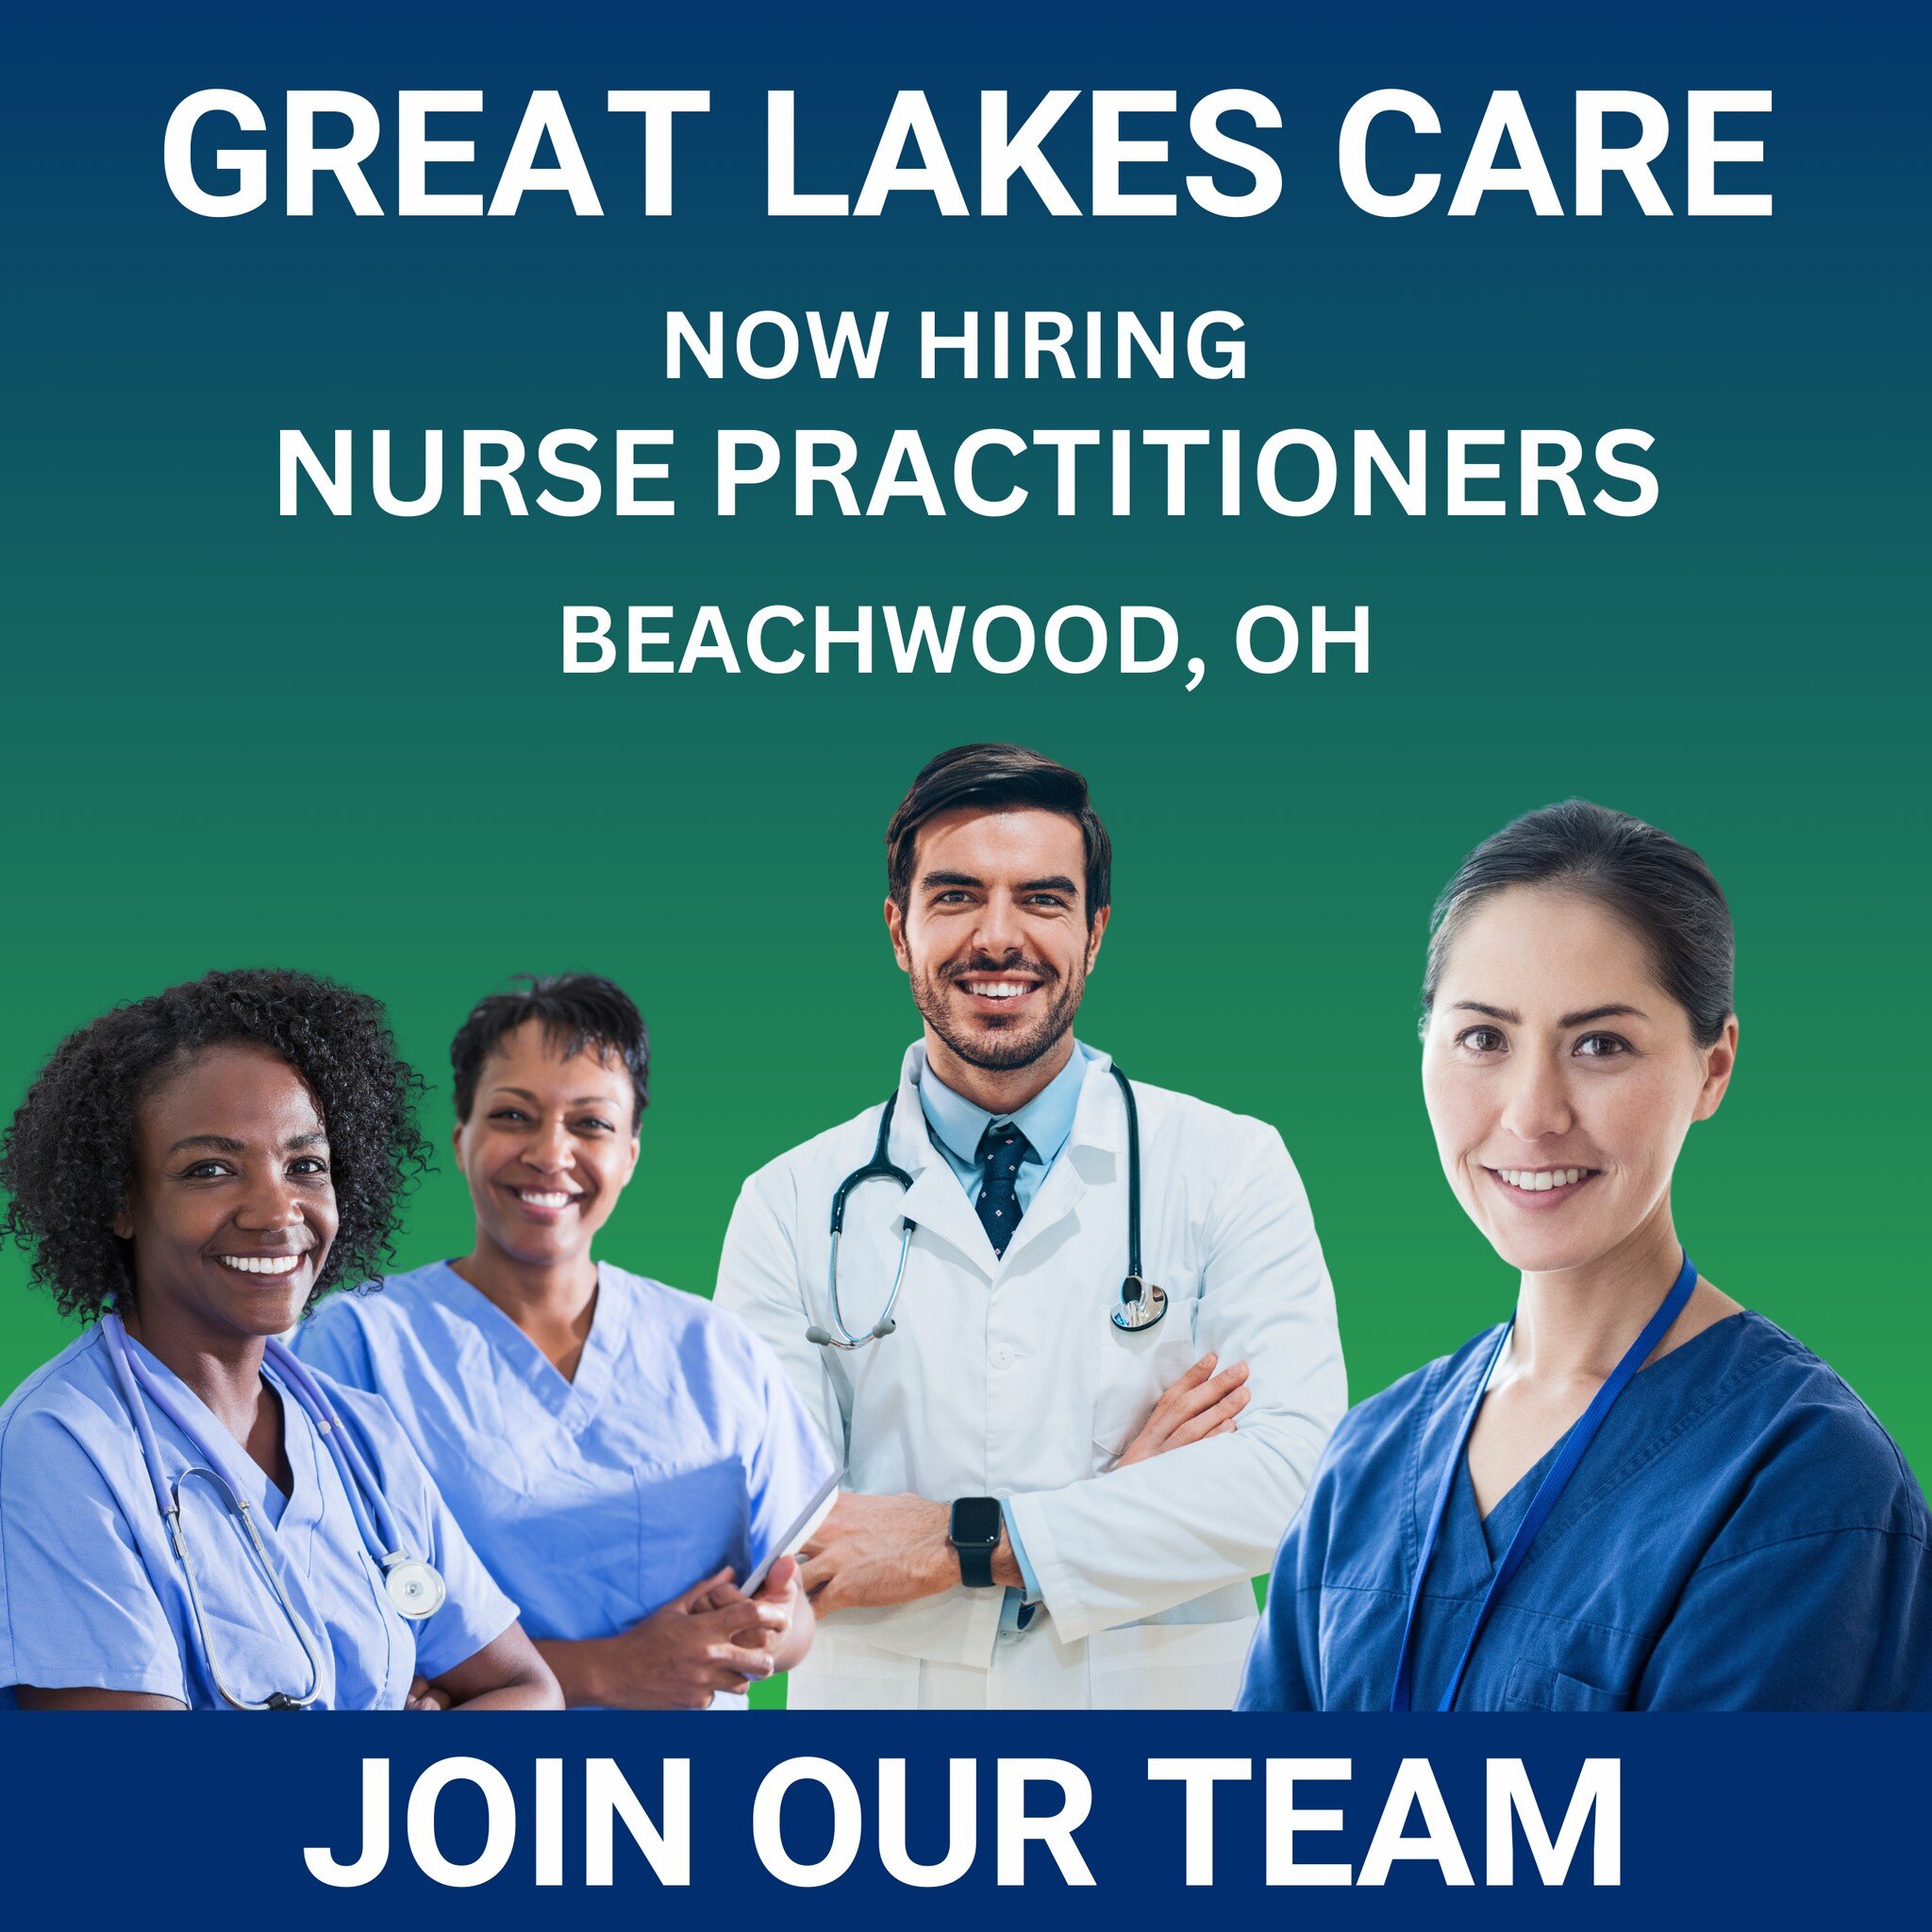 We Are Hiring! Join the Great Lakes Care Family Today! 

We are looking for Nurse Practitioners to join our team in conducting patient centered care in an acute rehab hospital and a behavioral health hospital in the Beachwood, Ohio area.

Learn more: